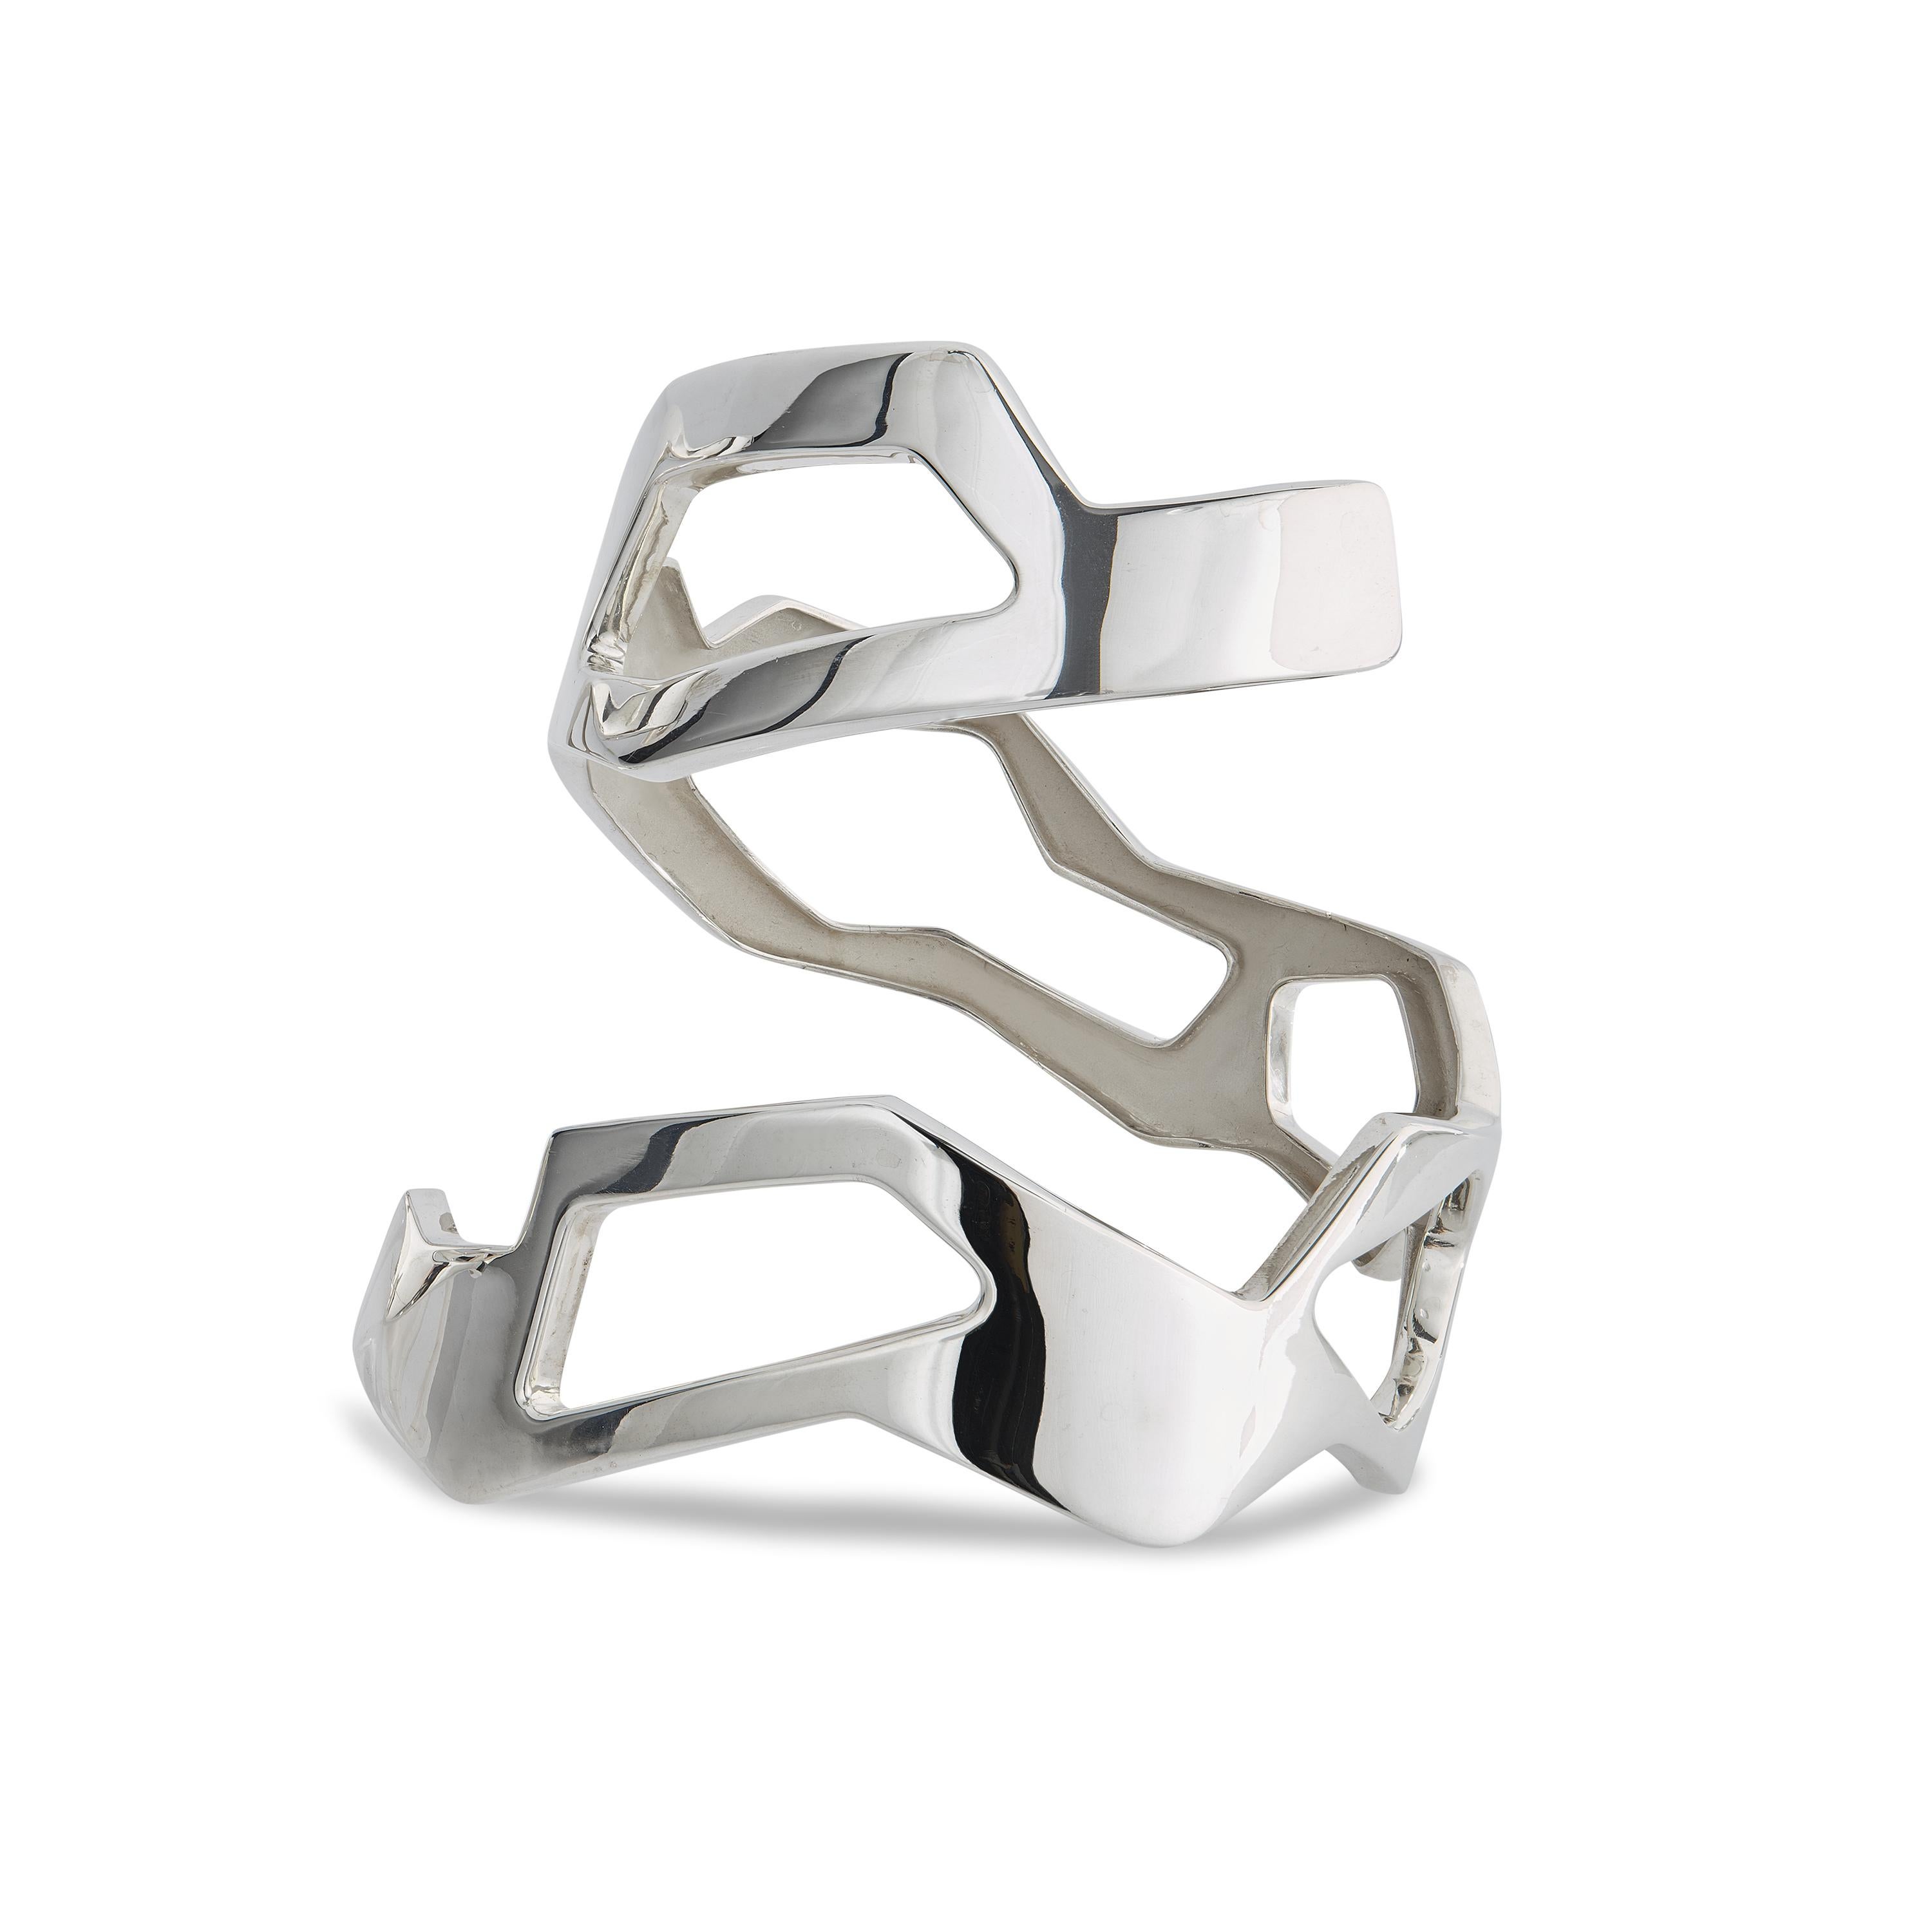 The infinitely varied and naturally beautiful configurations of drifting ice floes inspire the angular shapes of the Borealis Wide Cuff. Composed of light hollow geometric volumes with rounded edges, this contemporary and timeless sterling silver